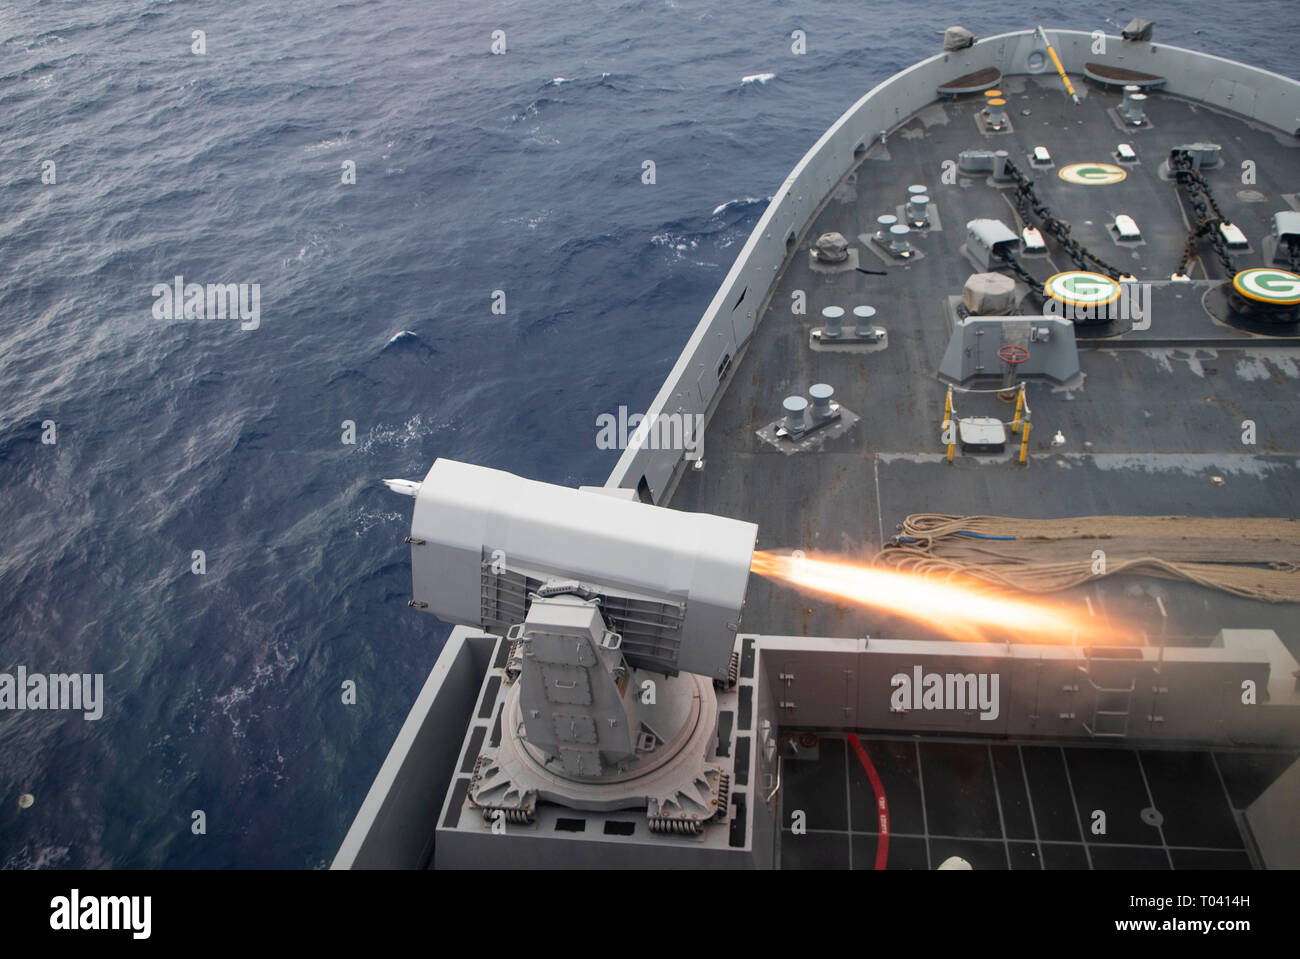 190316-N-DX072-1028 PACIFIC OCEAN (March 16, 2019) The amphibious transport dock ship USS Green Bay (LPD 20) launches a rolling airframe missile (RAM) during a missile exercise (MSLEX). MSLEXs are designed to increase the tactical proficiency, lethality, and interoperability of participating warships in an Era of Great Power Competition. (U.S. Navy photo by Mass Communication Specialist 2nd Class Anaid Banuelos Rodriguez) Stock Photo